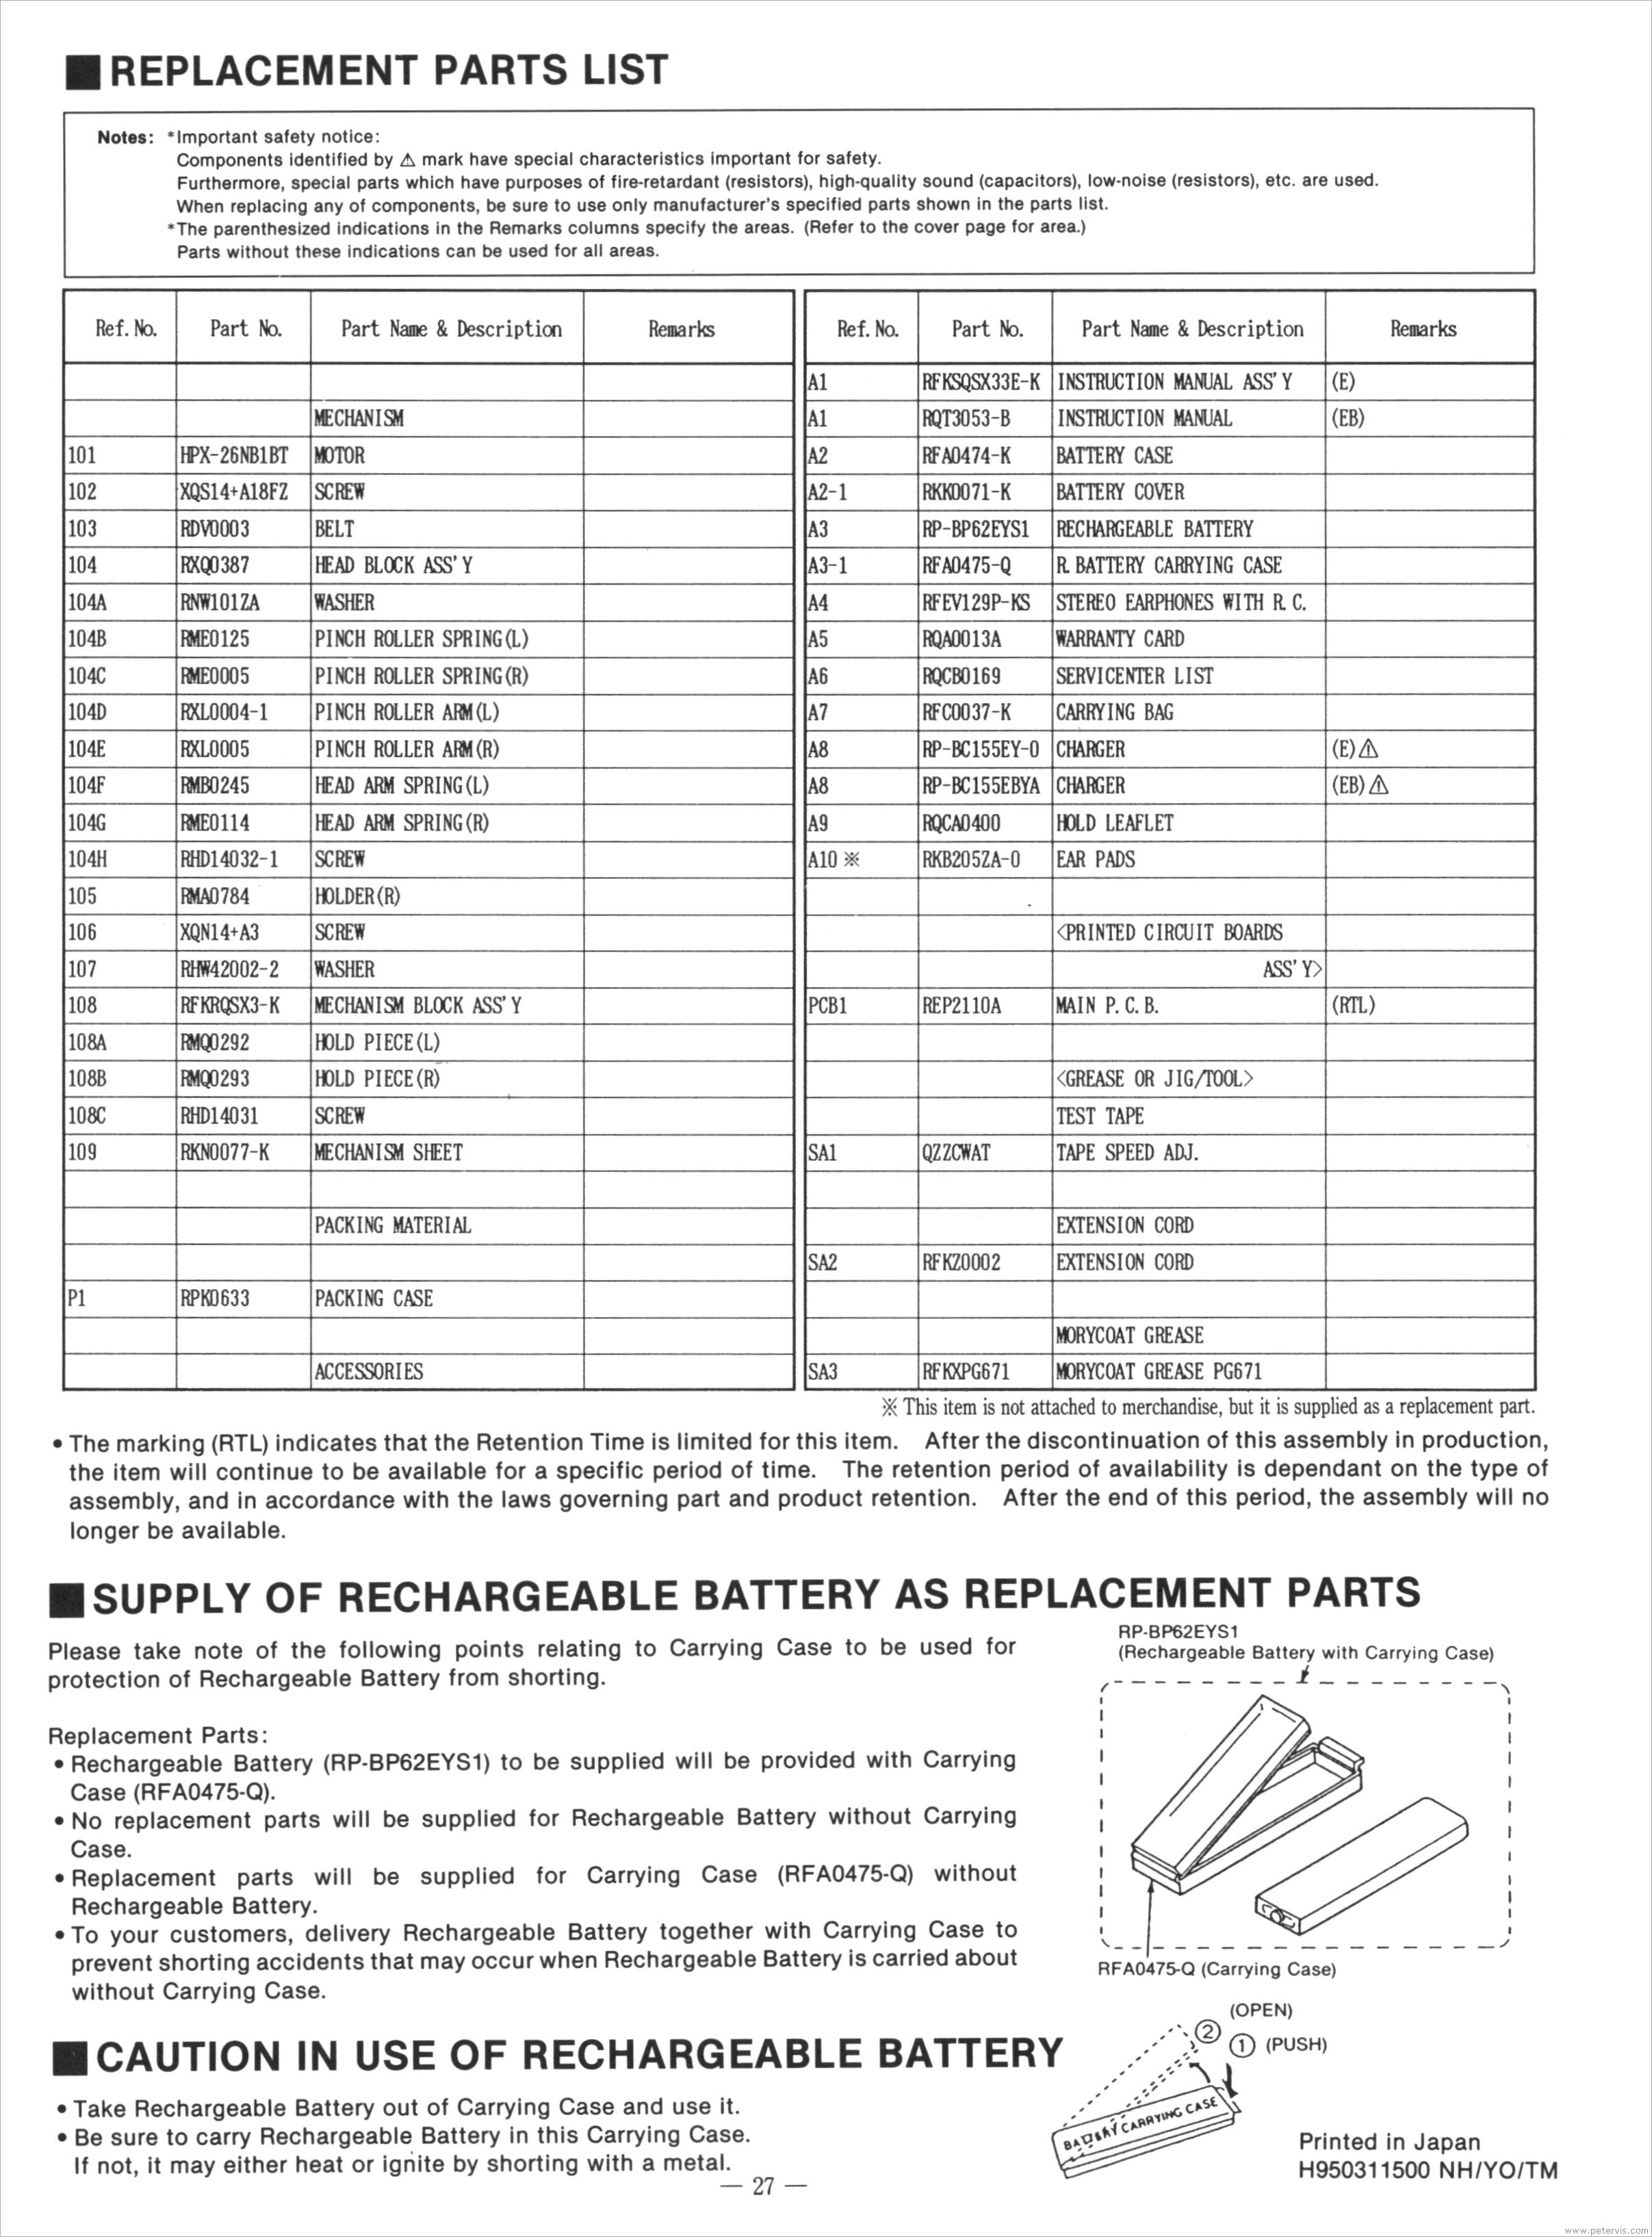 027 REPLACEMENT PARTS LIST